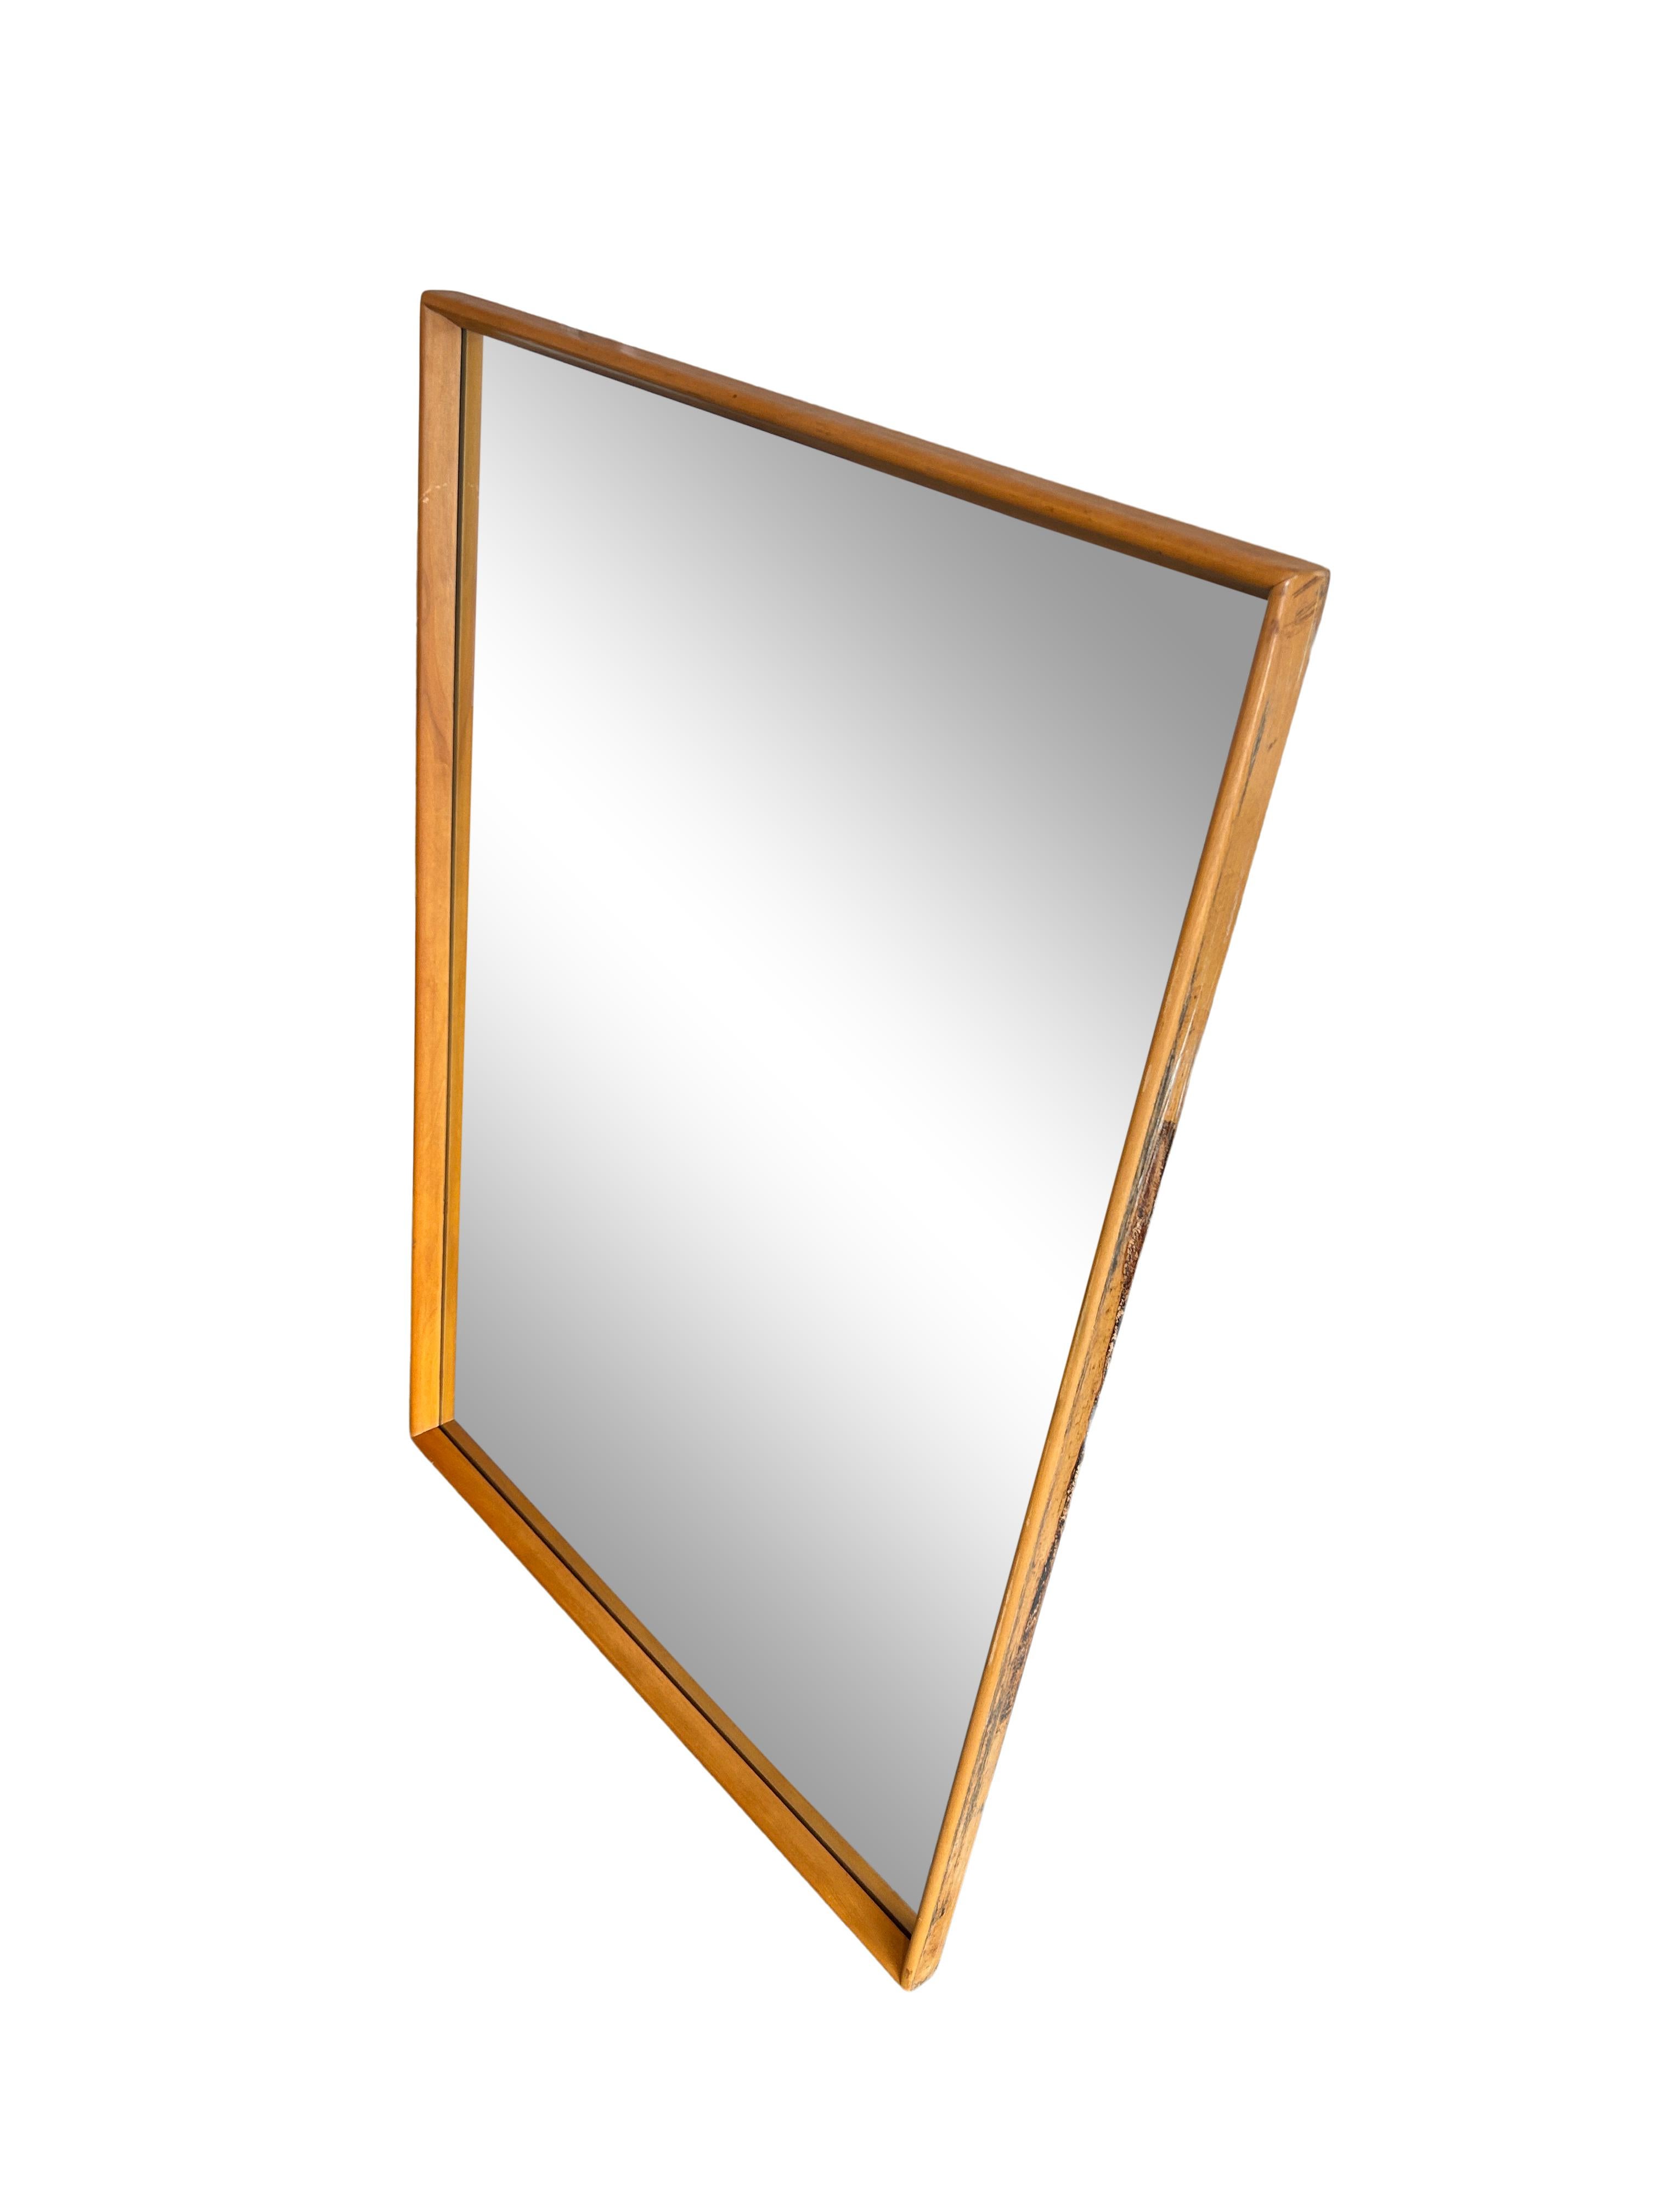 American Midcentury Solid Blonde Maple Sculptured Wall Mirror by Heywood Wakefield For Sale